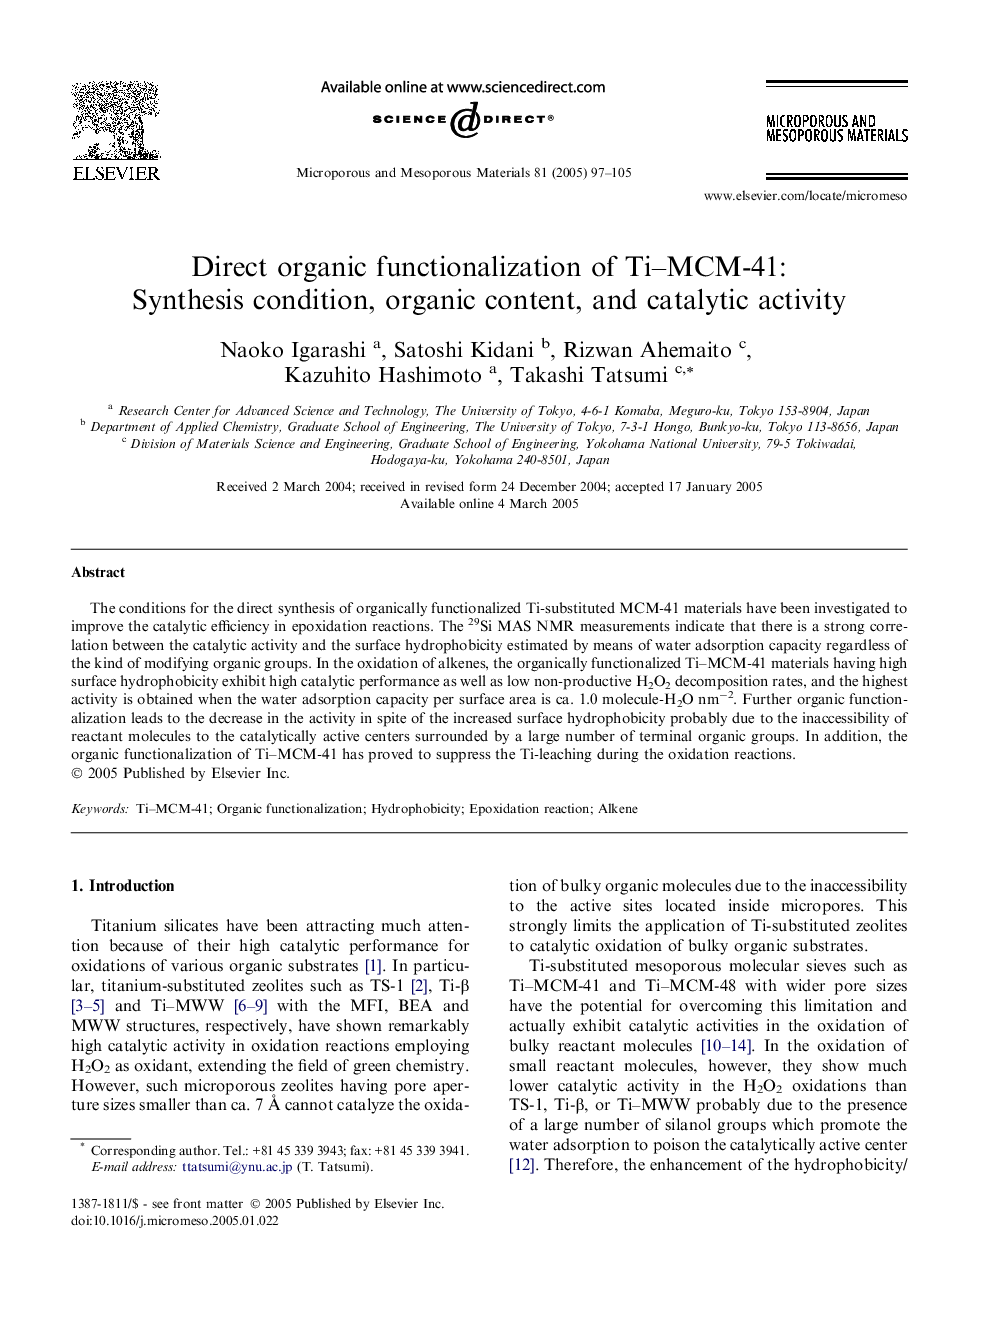 Direct organic functionalization of Ti-MCM-41: Synthesis condition, organic content, and catalytic activity